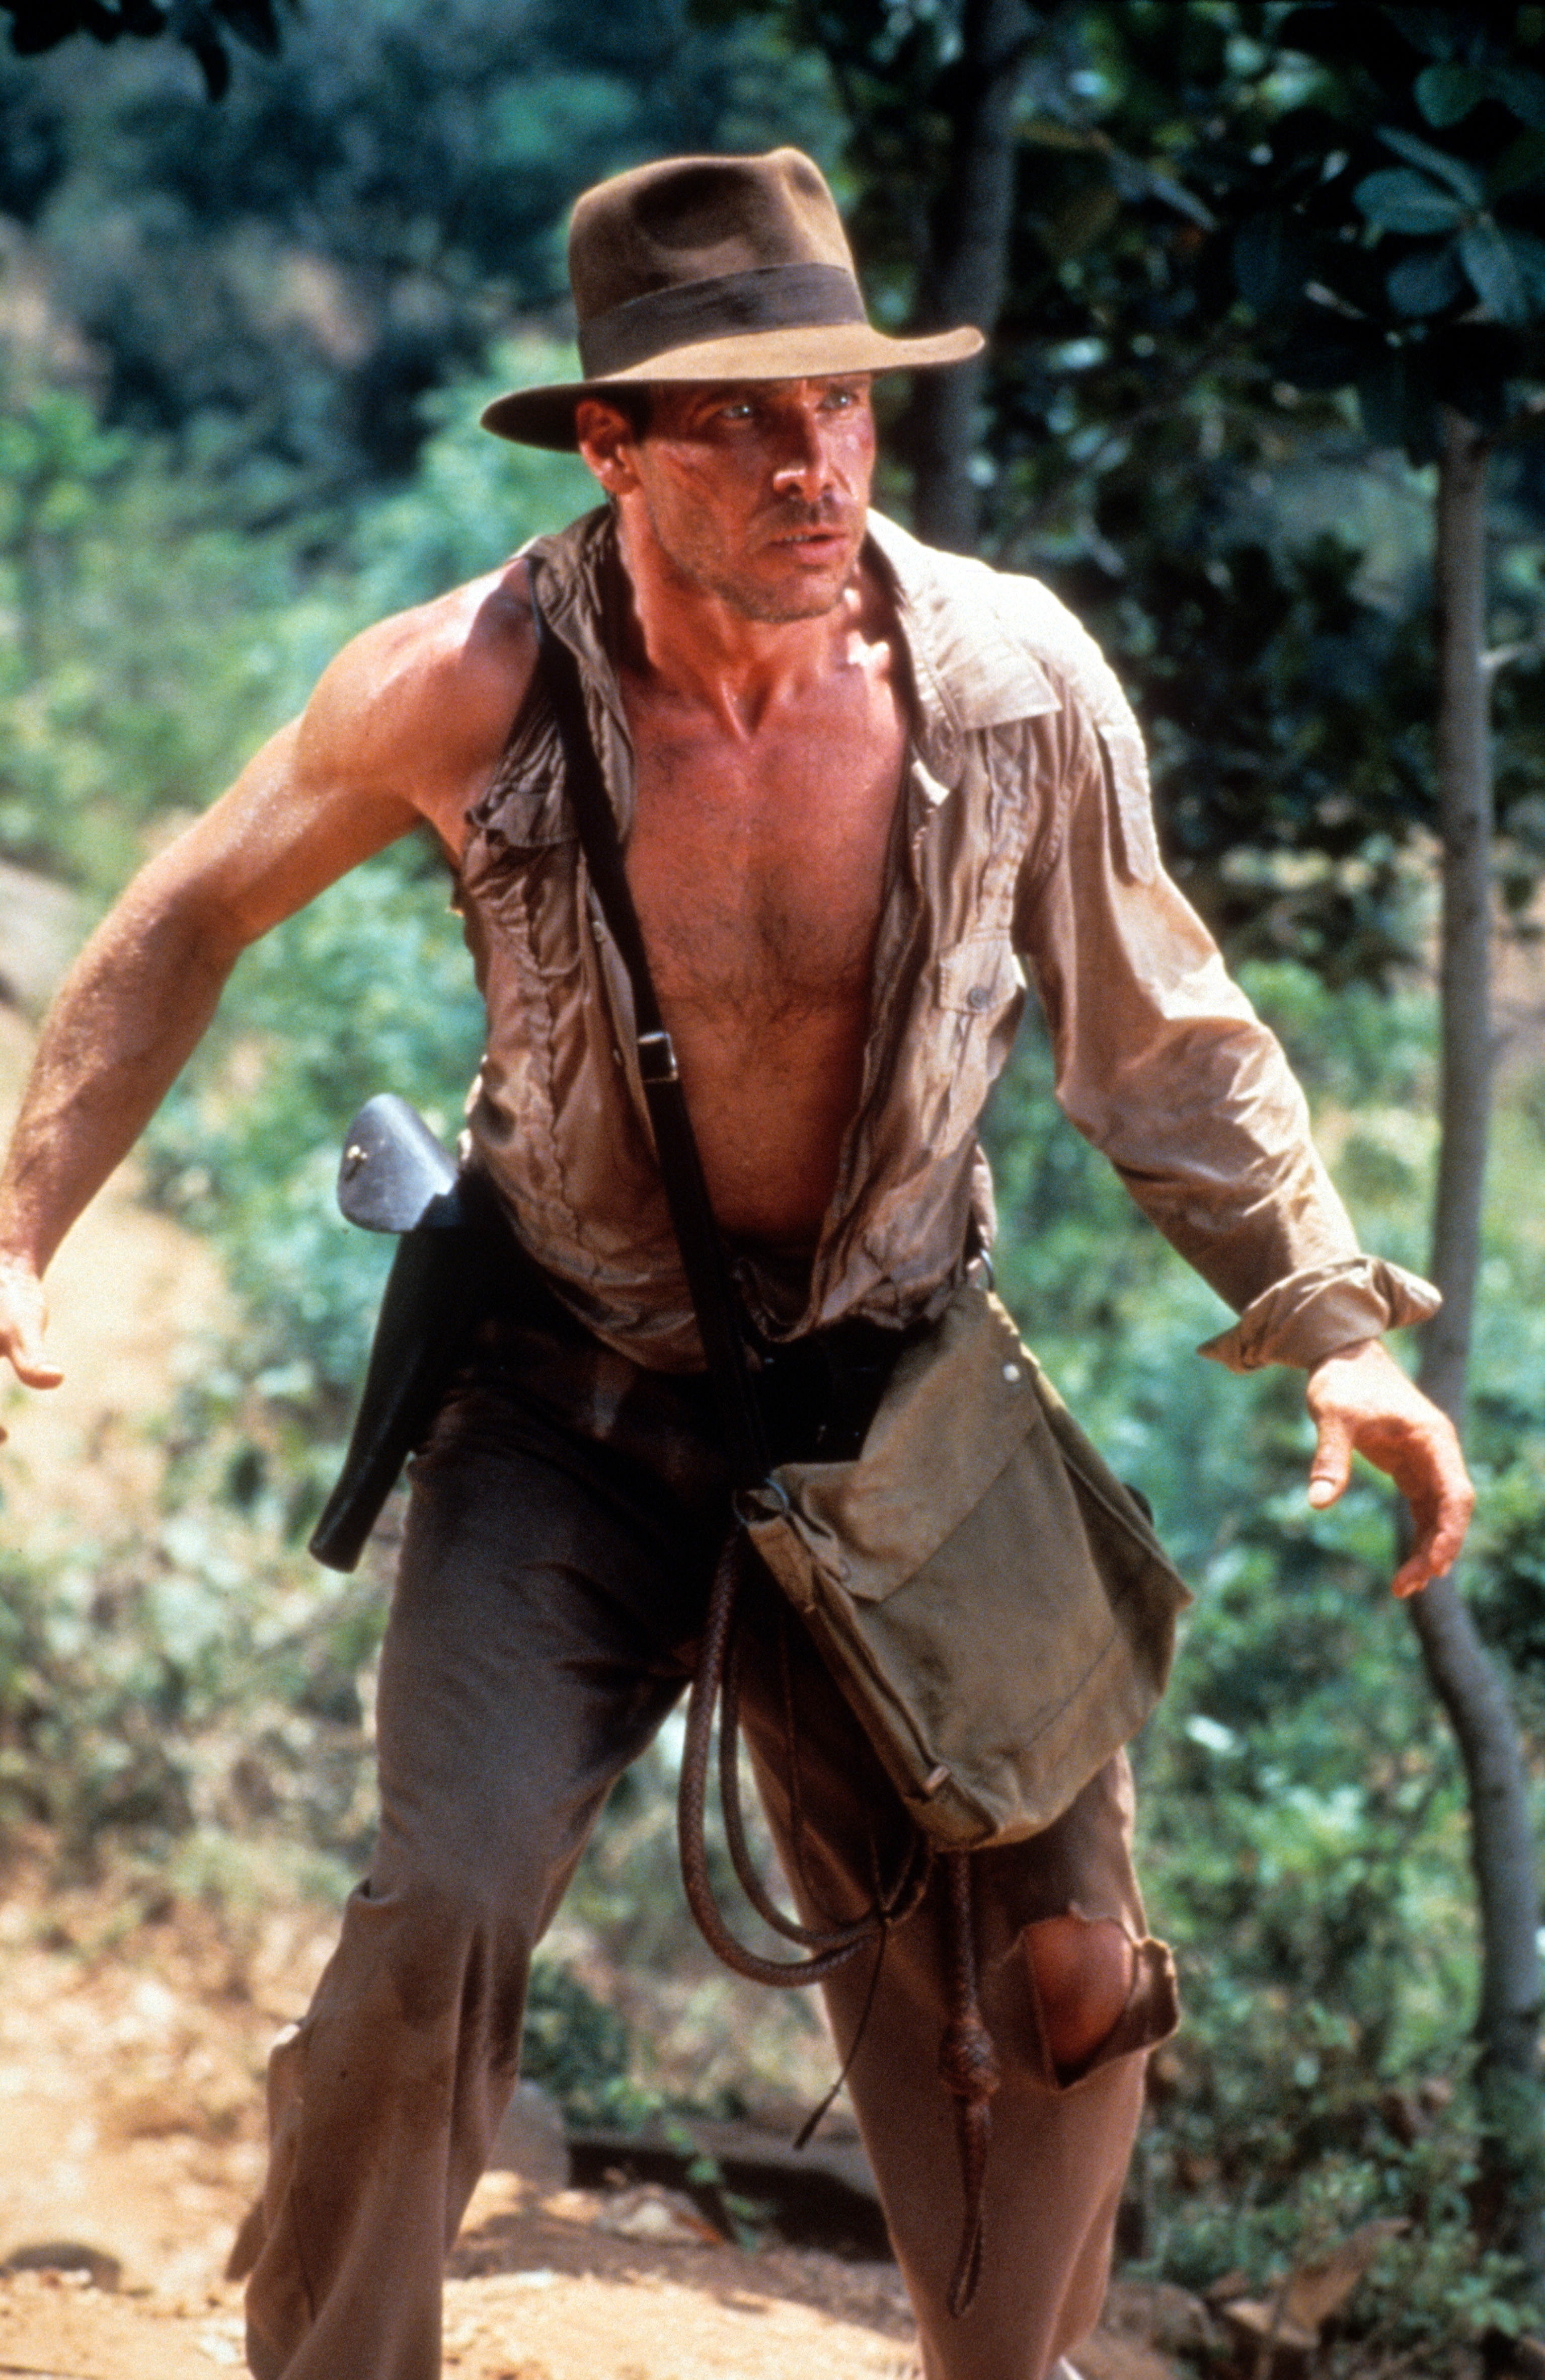 Harrison Ford in a scene from the film “Indiana Jones And The Temple Of Doom” in 1984 | Source: Getty Images